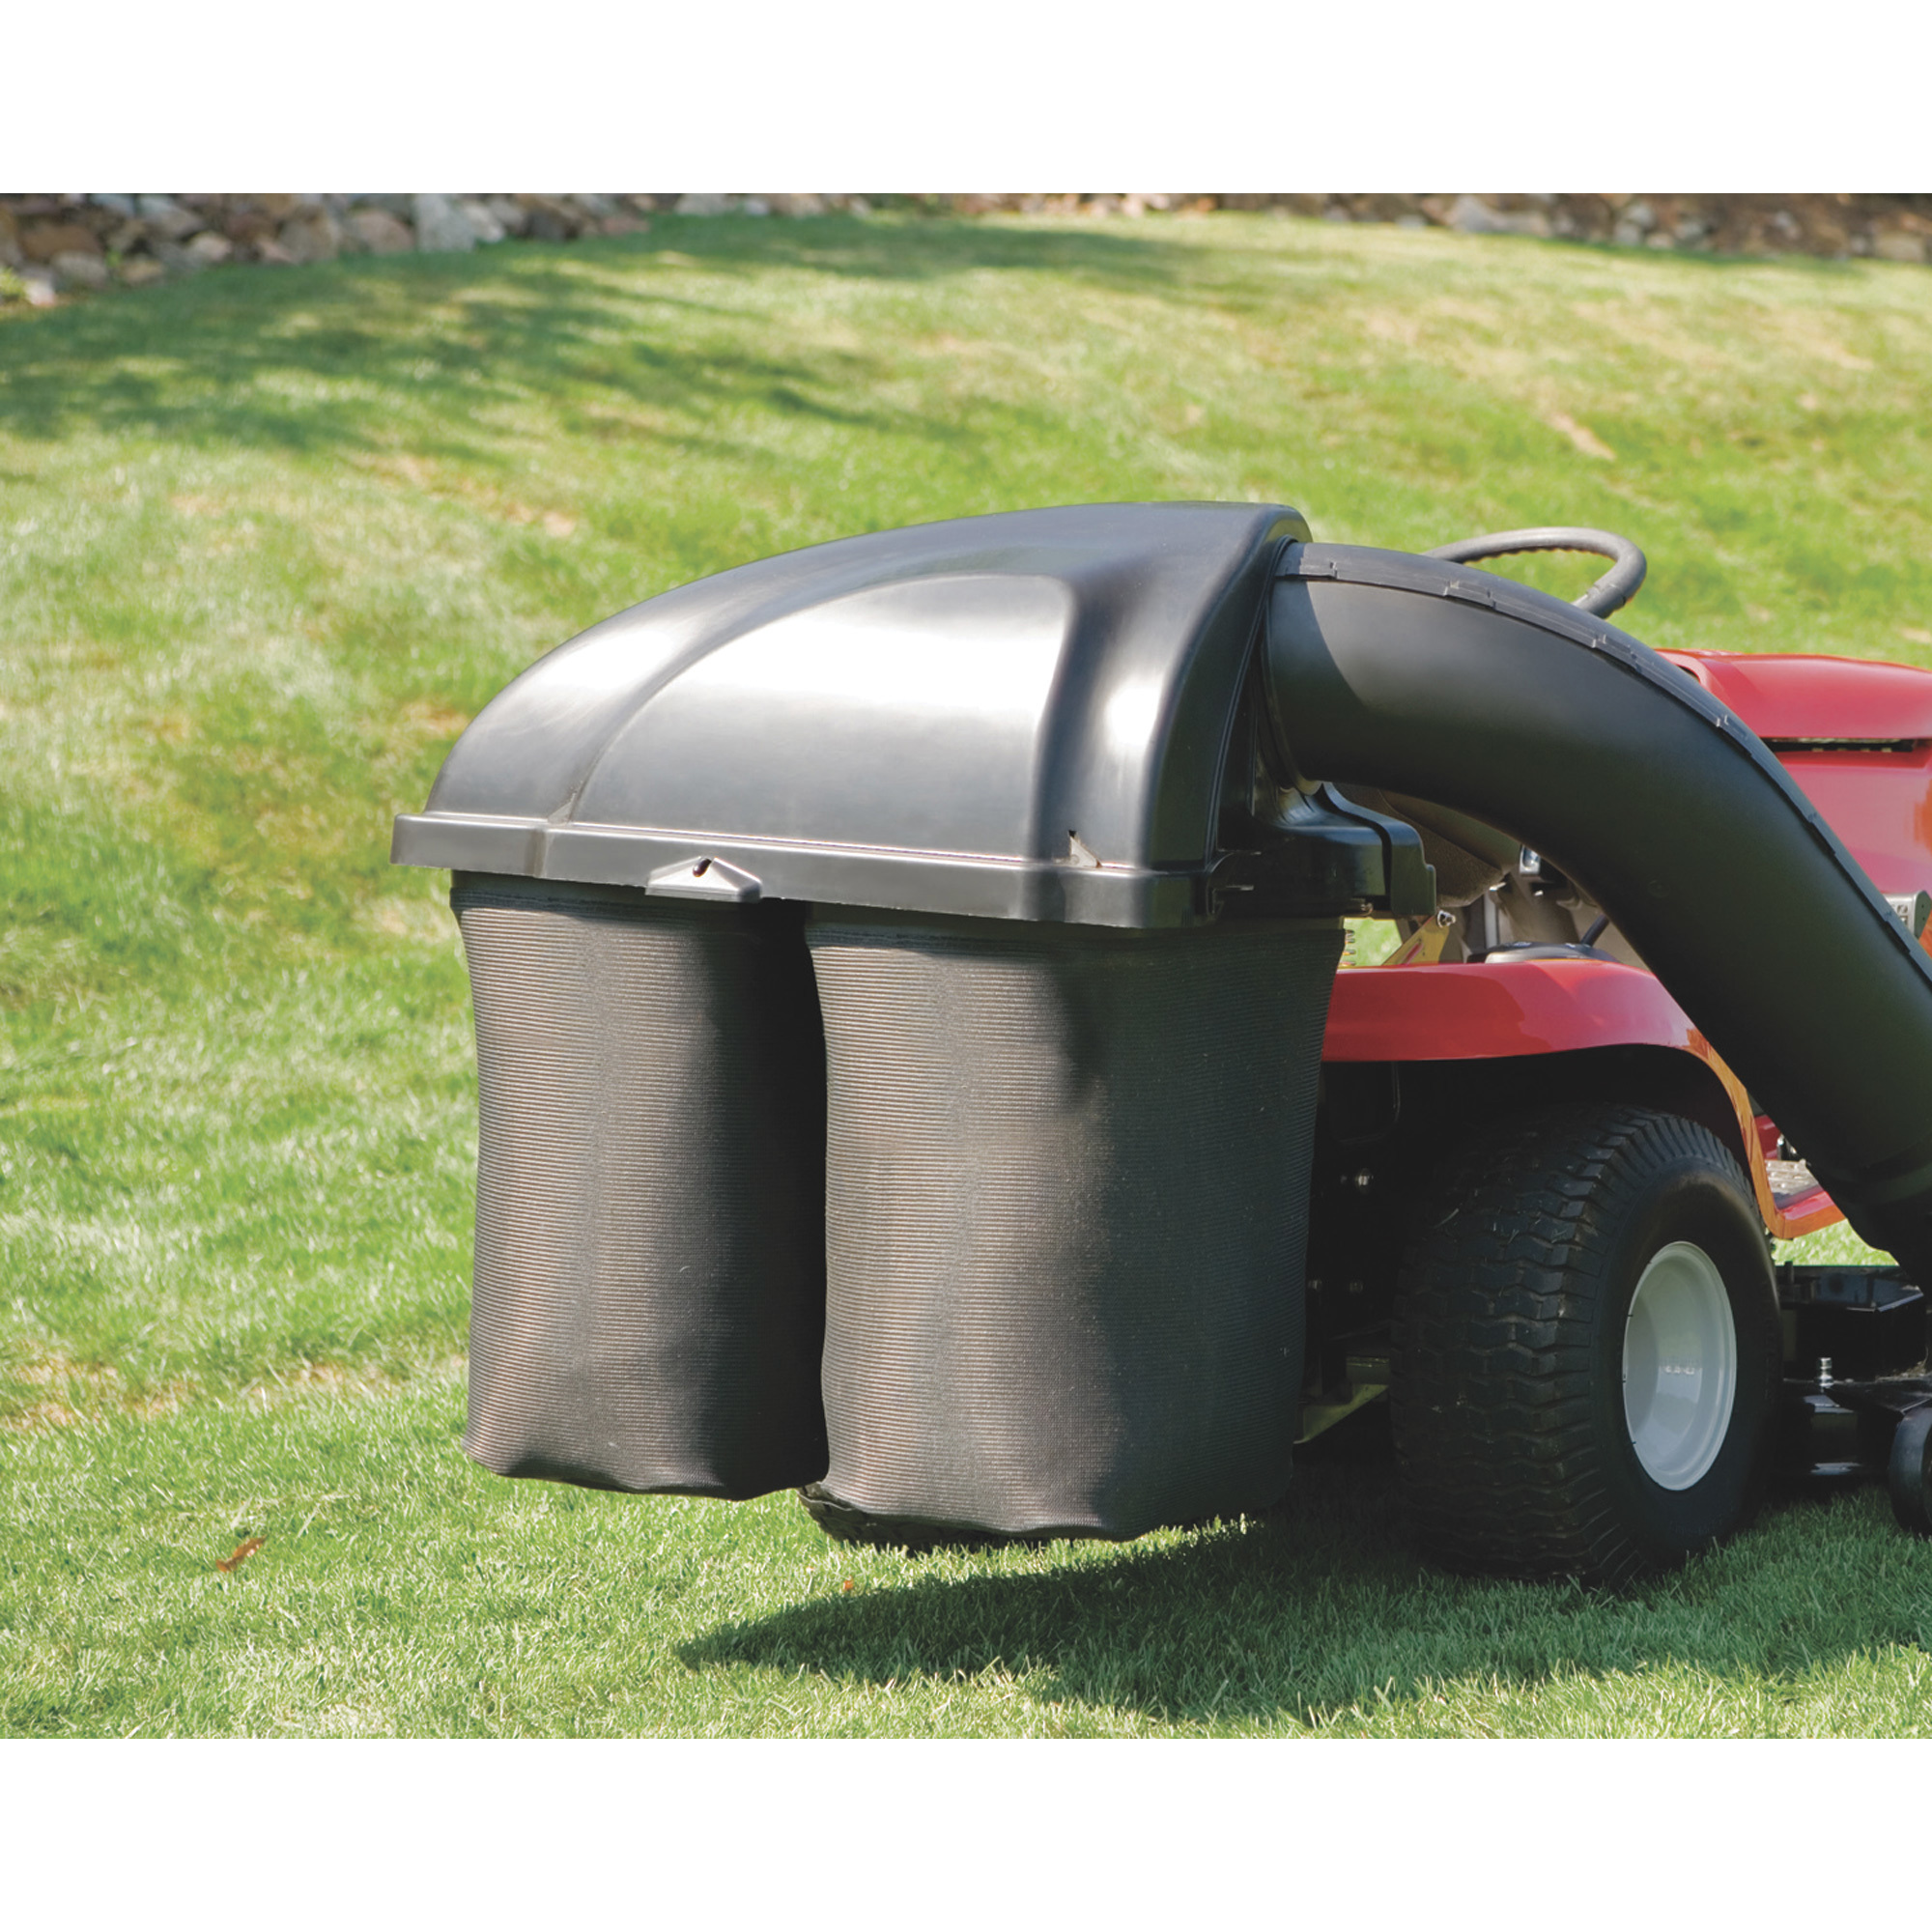 Arnold Corp Rear-Mounted Bagger for MTD and Yard-Man Riding Lawn Mowers â For 2002â09 MTD and Yard-Man Mowers with 38Inch and 42Inch Decks, Model